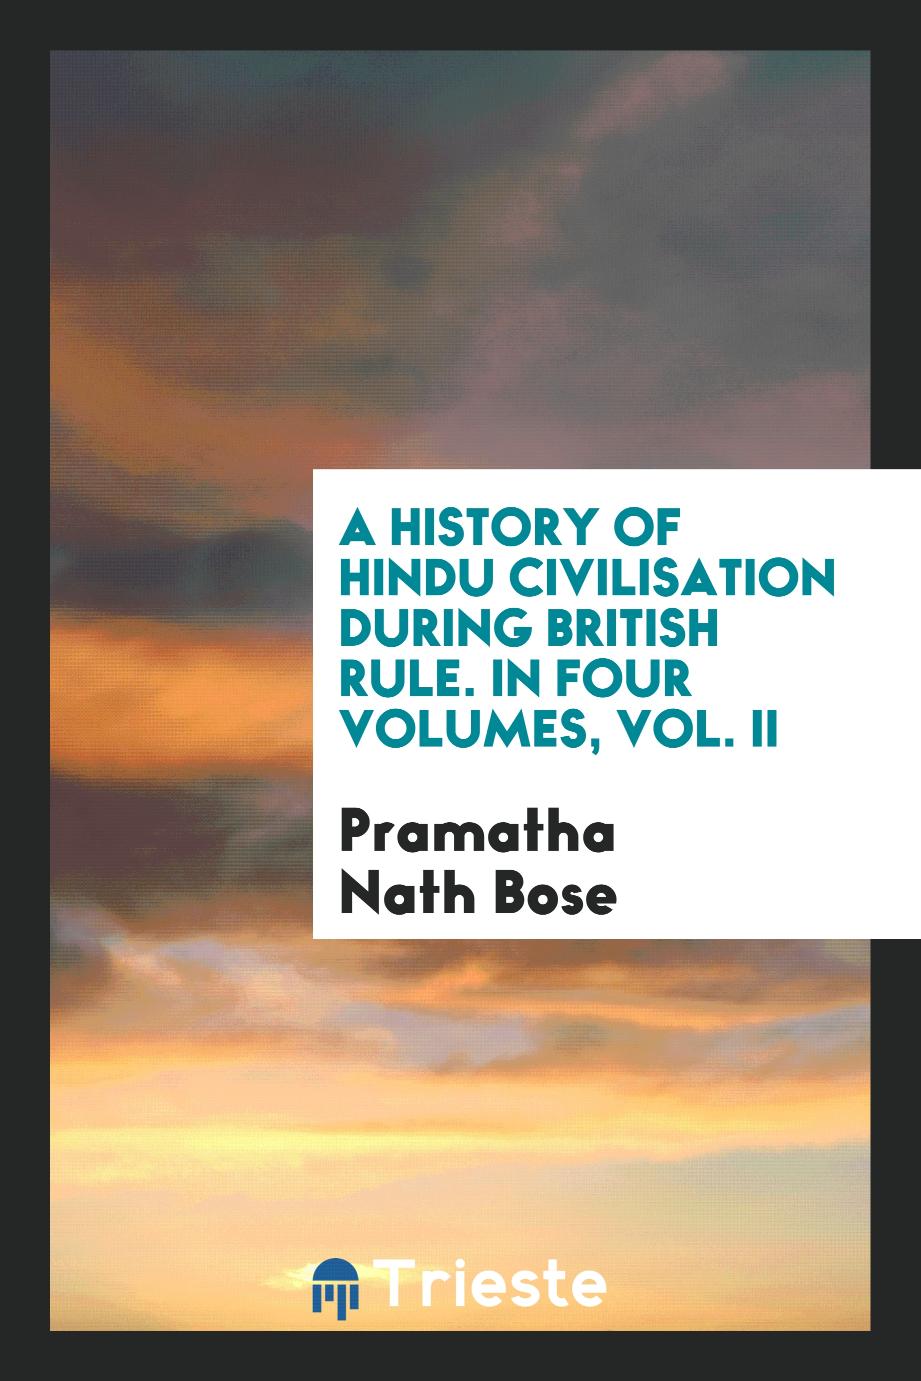 A History of Hindu Civilisation During British Rule. In Four Volumes, Vol. II